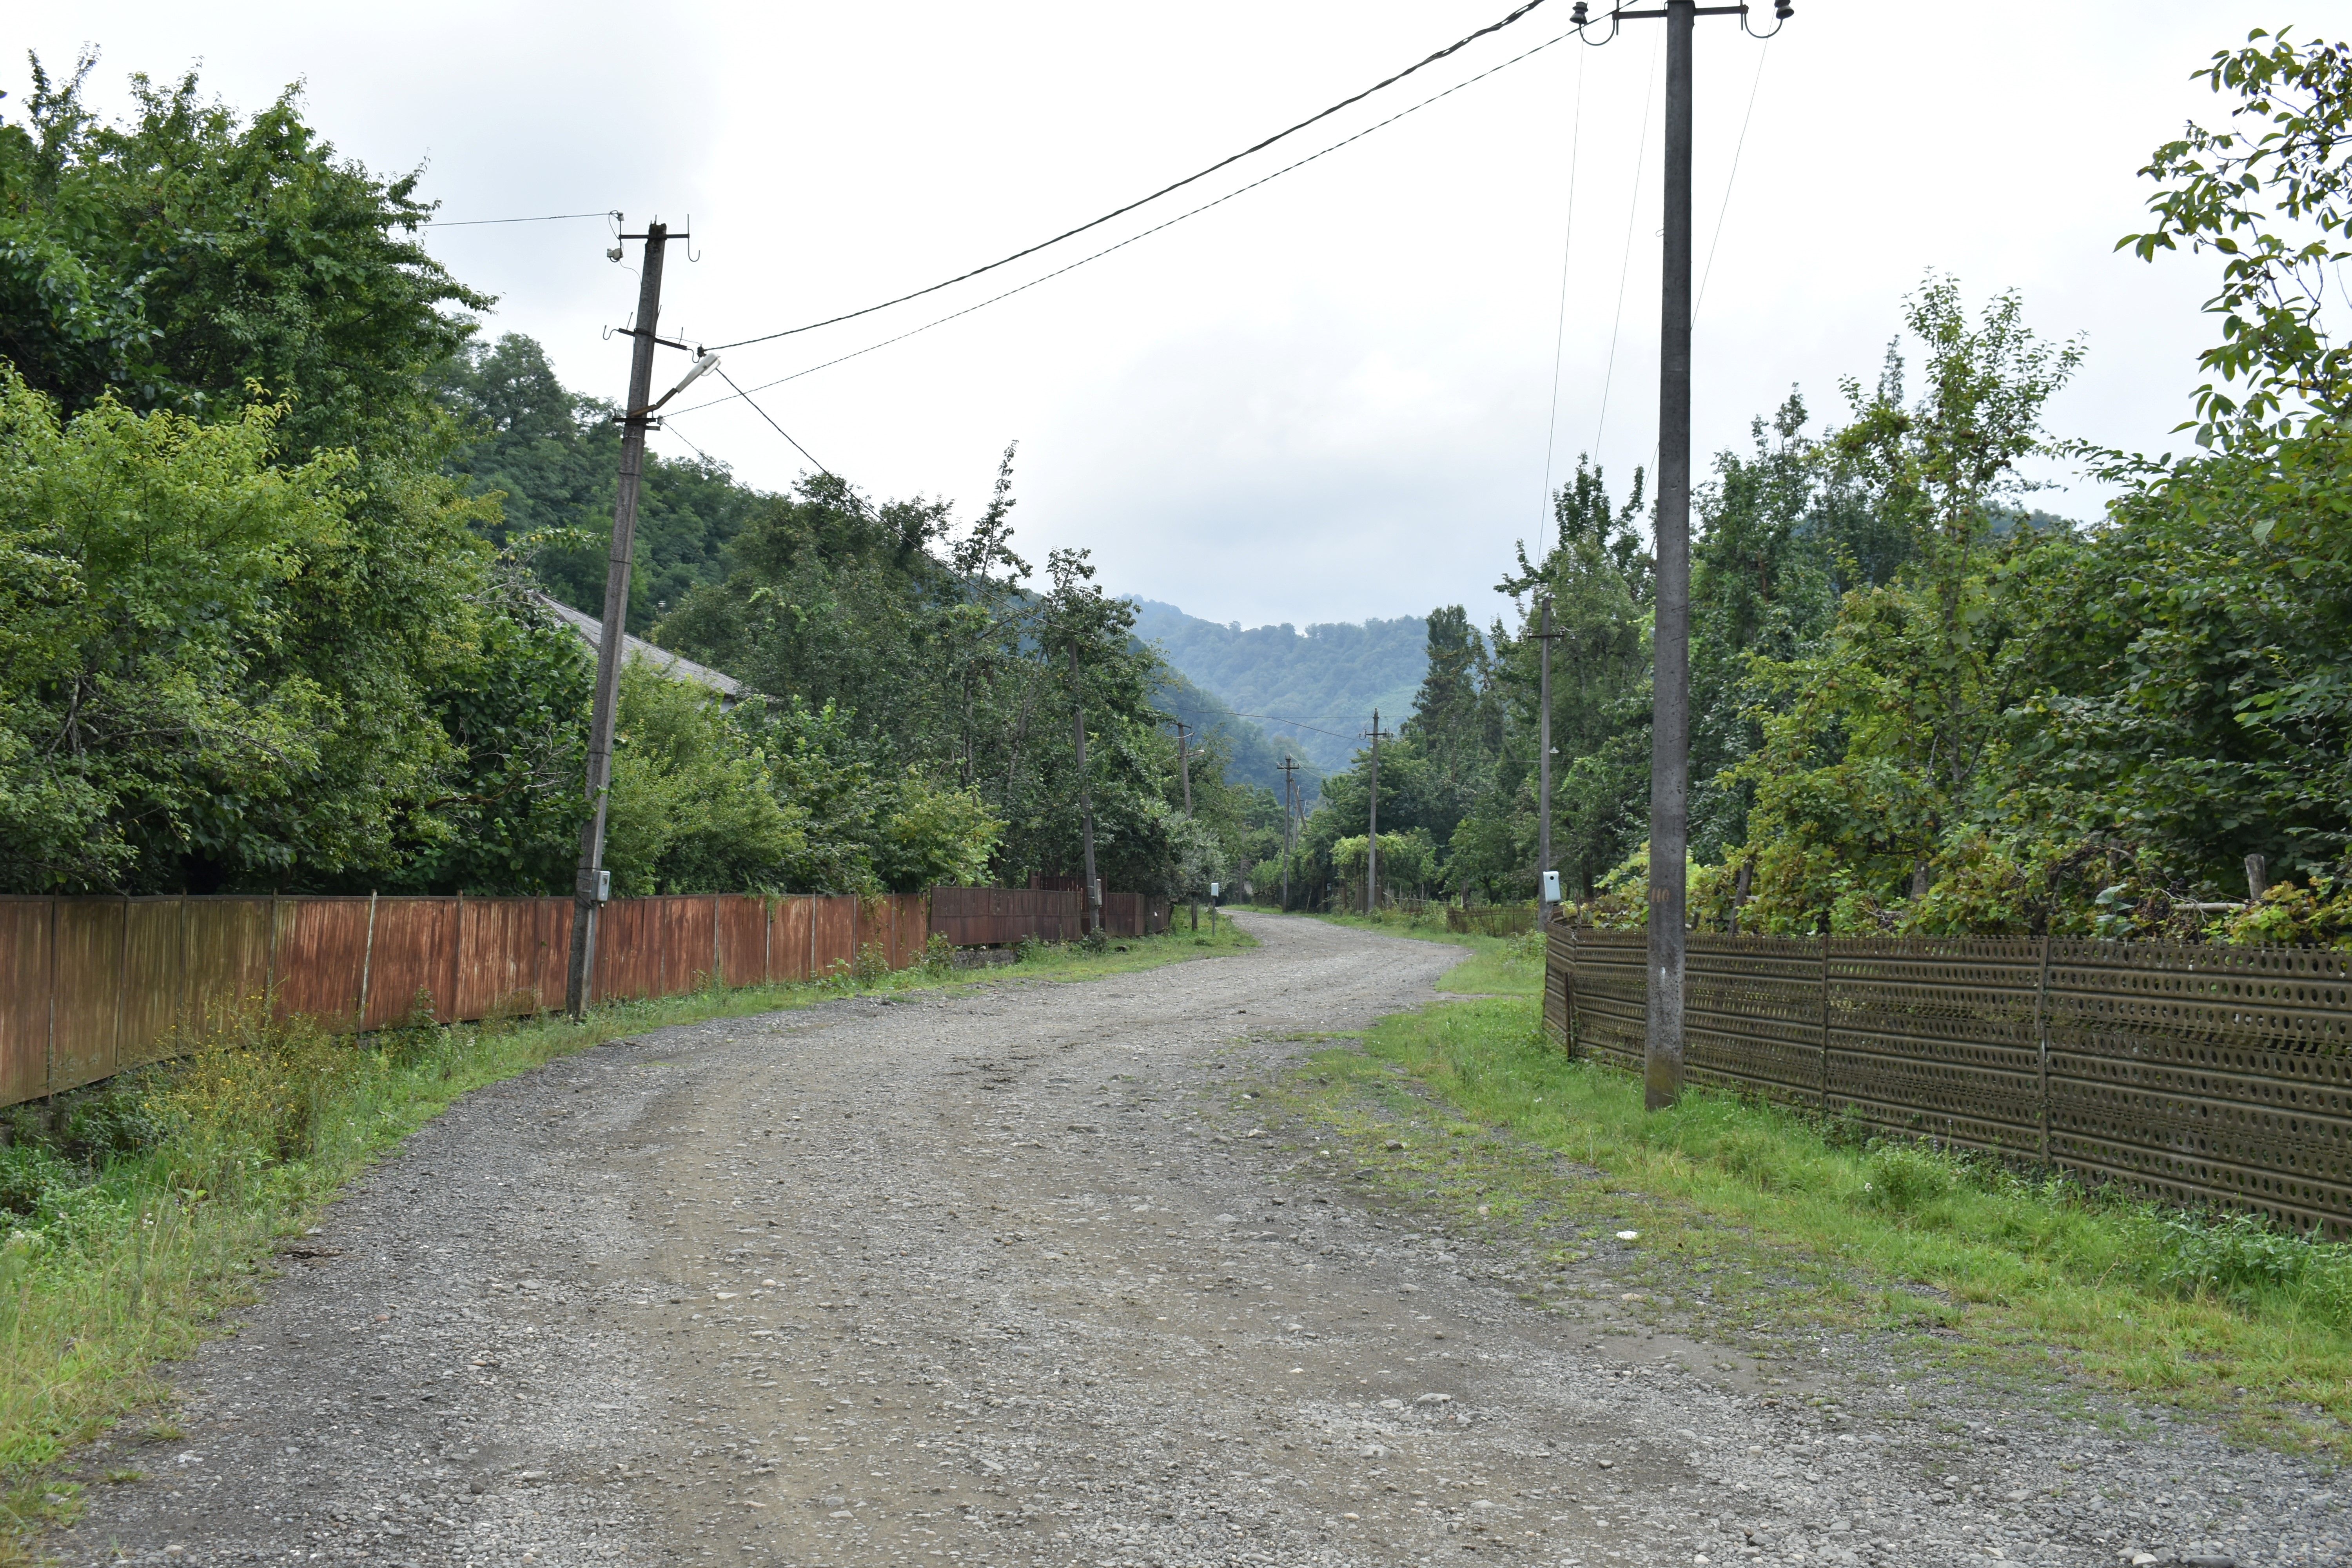 A rural mountain road in Guria, traversed for hours by the reporter to reach the interviewees. Image by Kaitlyn Johnson. Georgia, 2019.